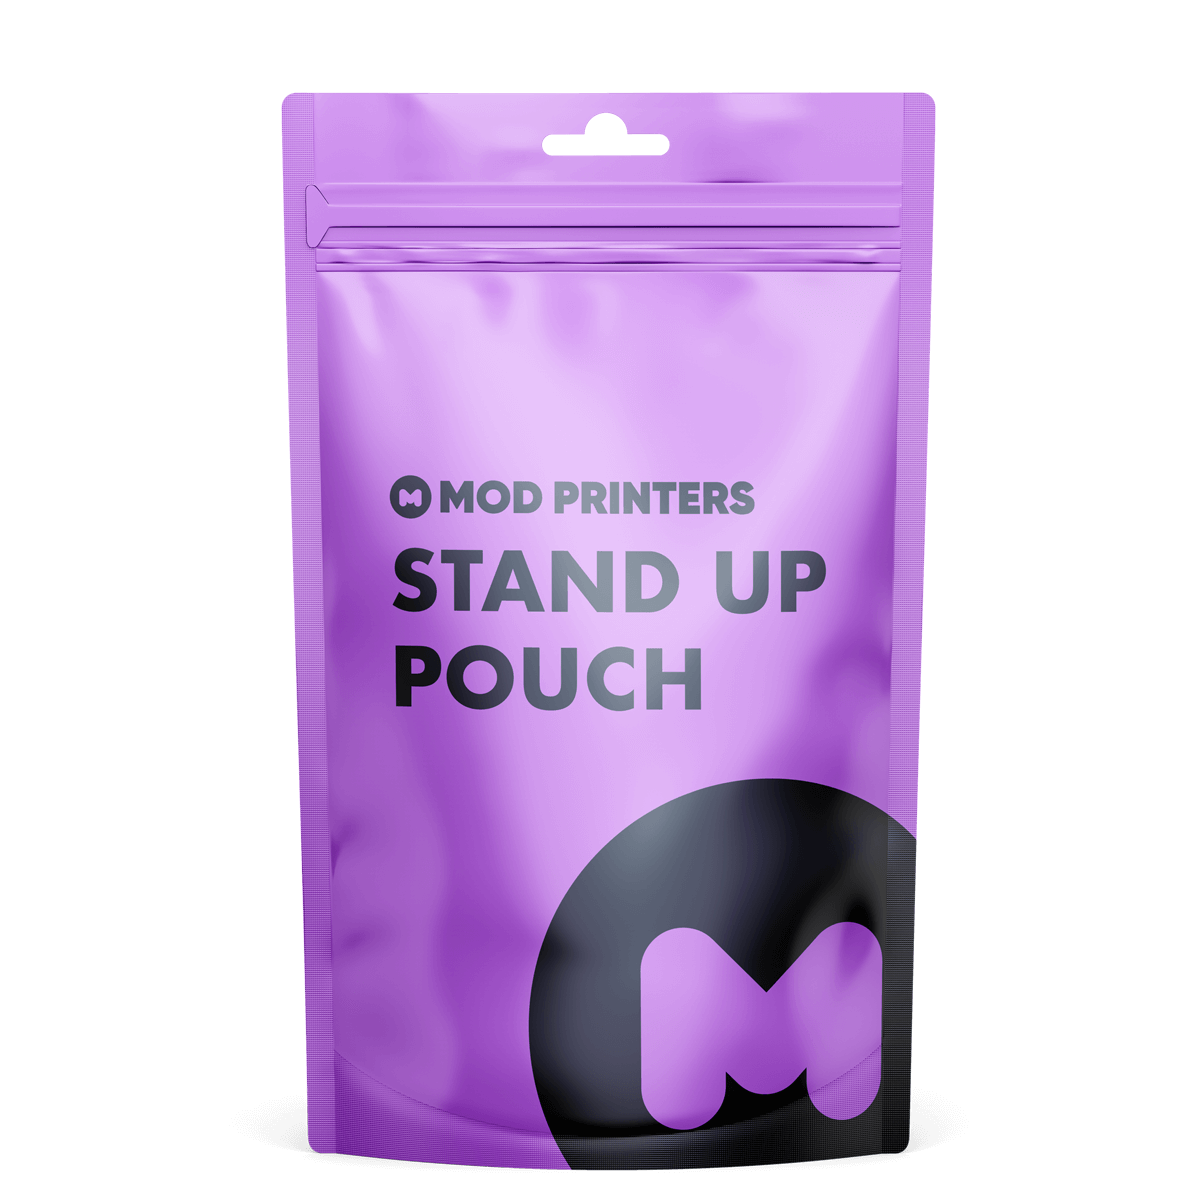 https://modprinters.com/wp-content/uploads/2021/08/stand-up-pouch.png